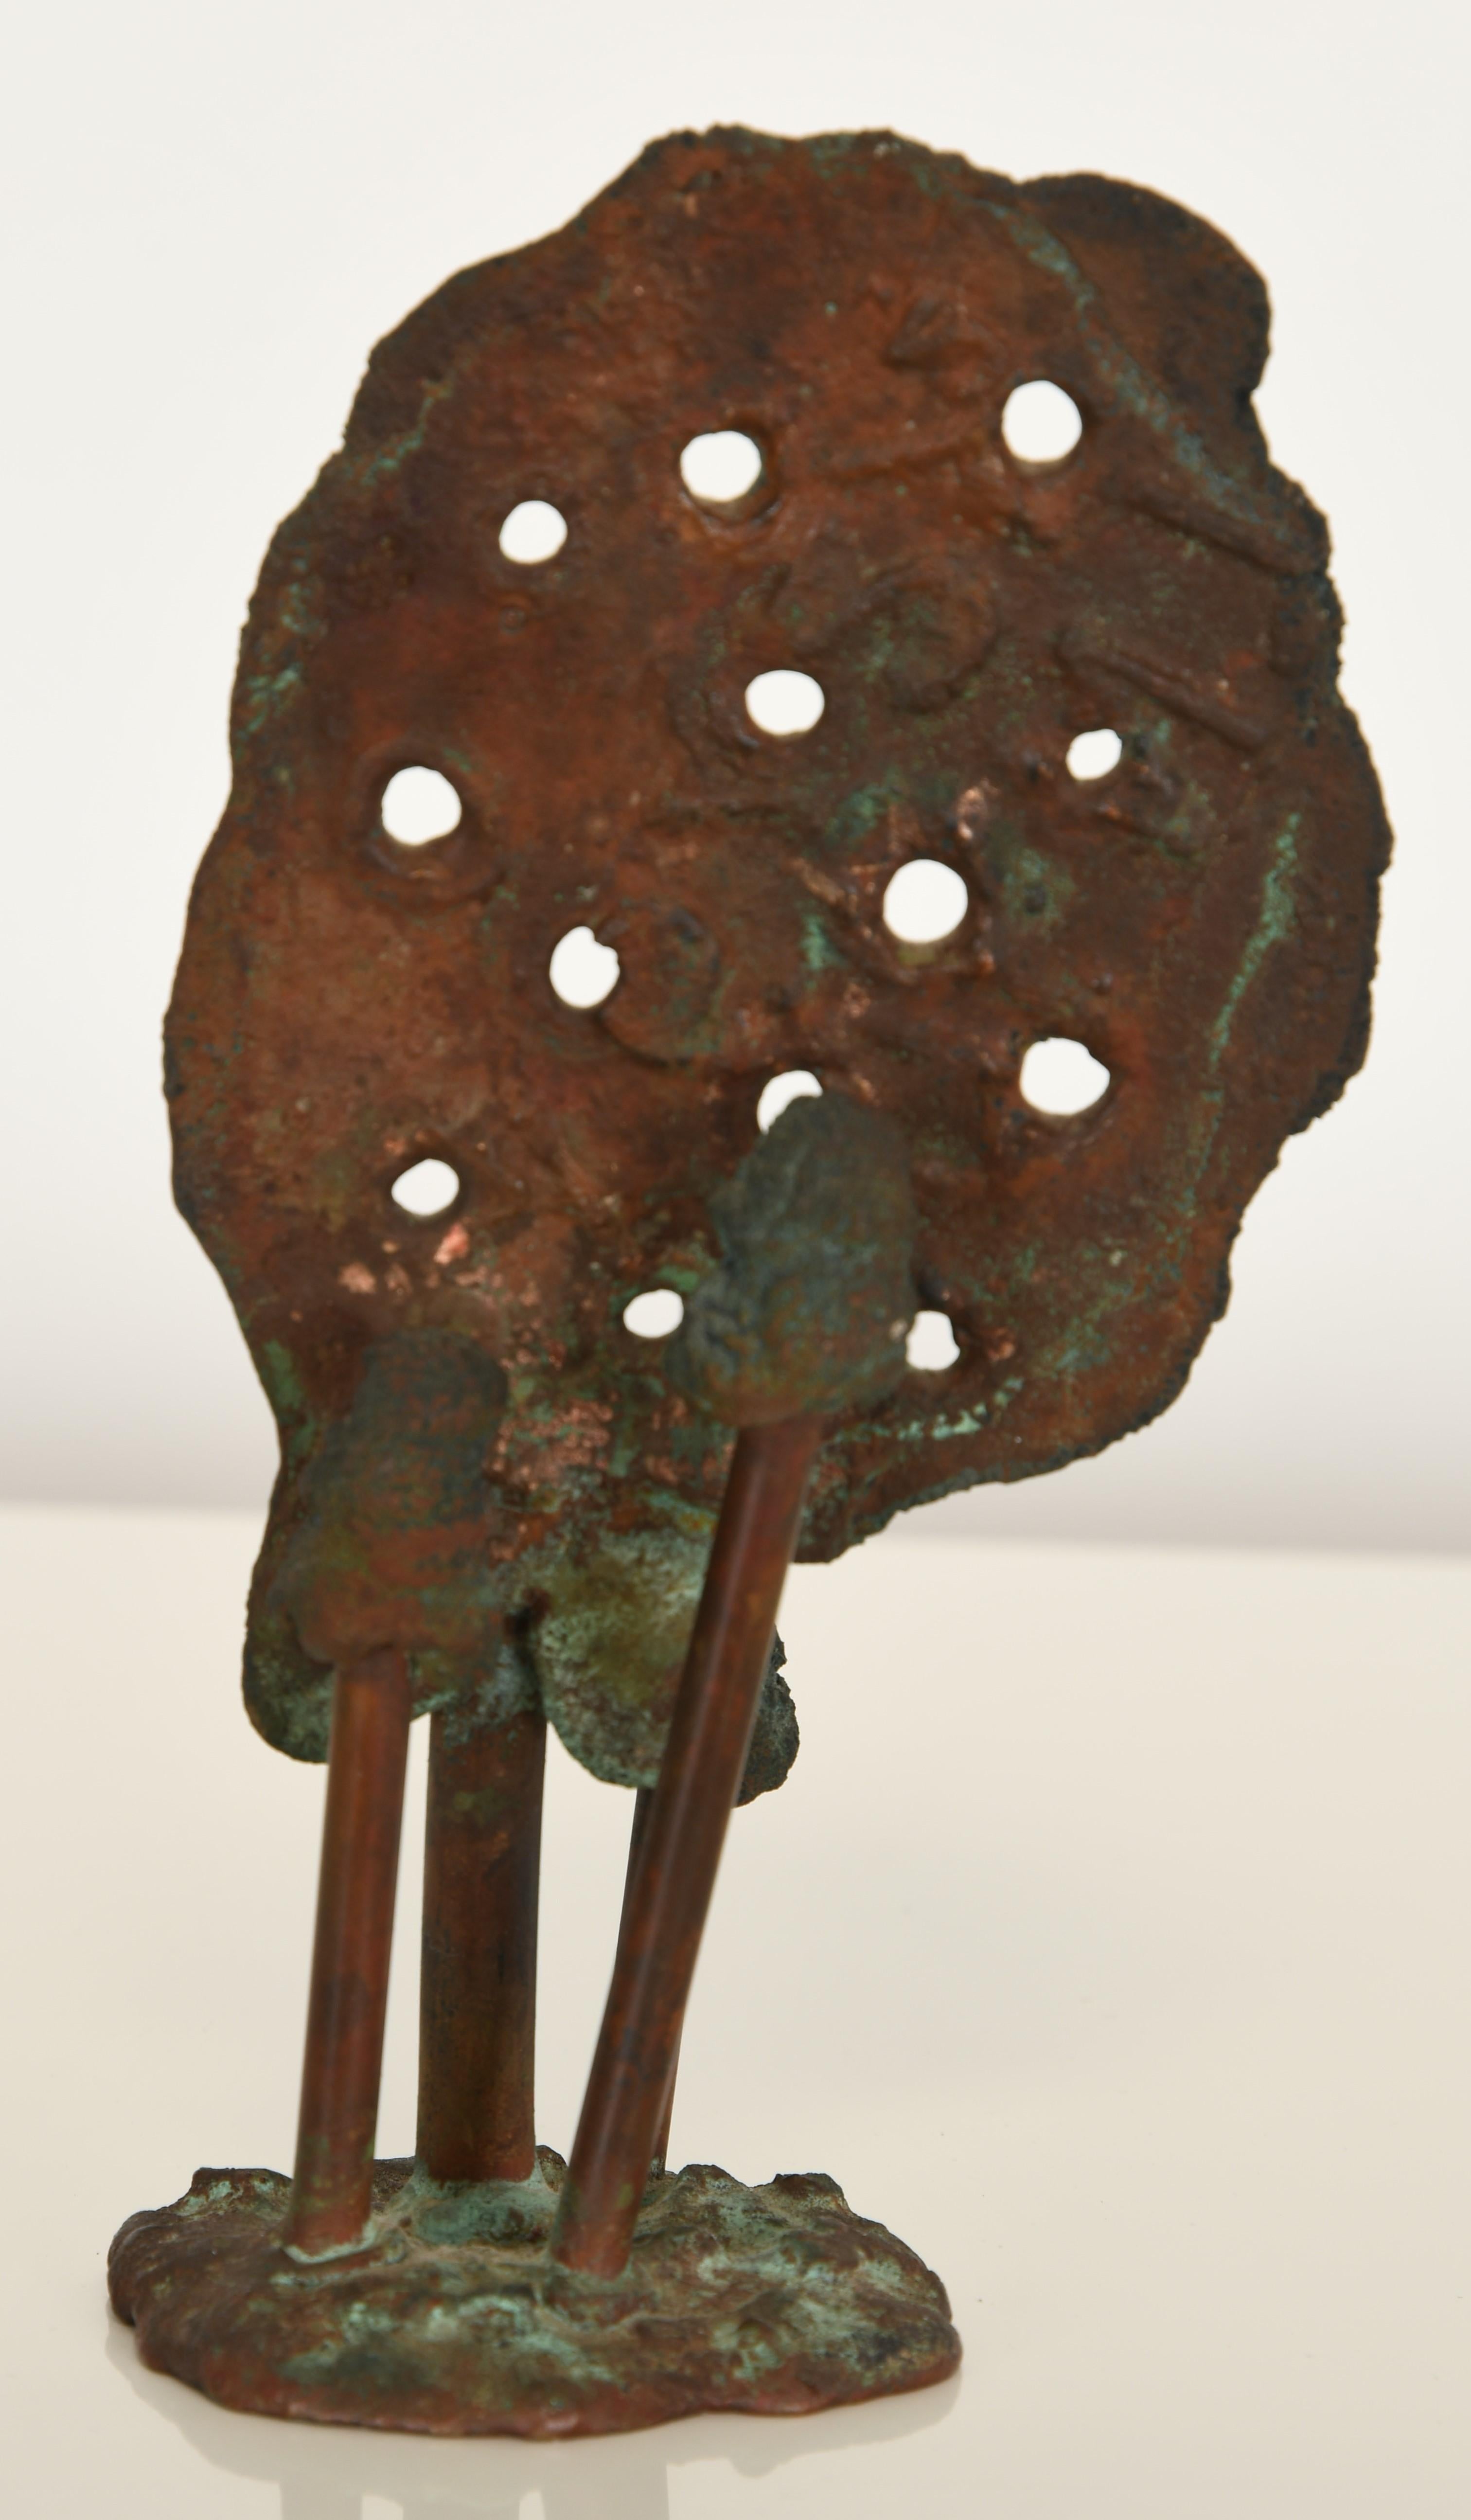 A modernist Klaus Ihlenfeld abstract bronze untitled organic mushroom sculpture, unmarked. Klaus Ihlenfeld was a studio assistant to Harry Bertoia. He is best known for his abstract sculptures in bronze and was heavily influenced by Bertoia. He